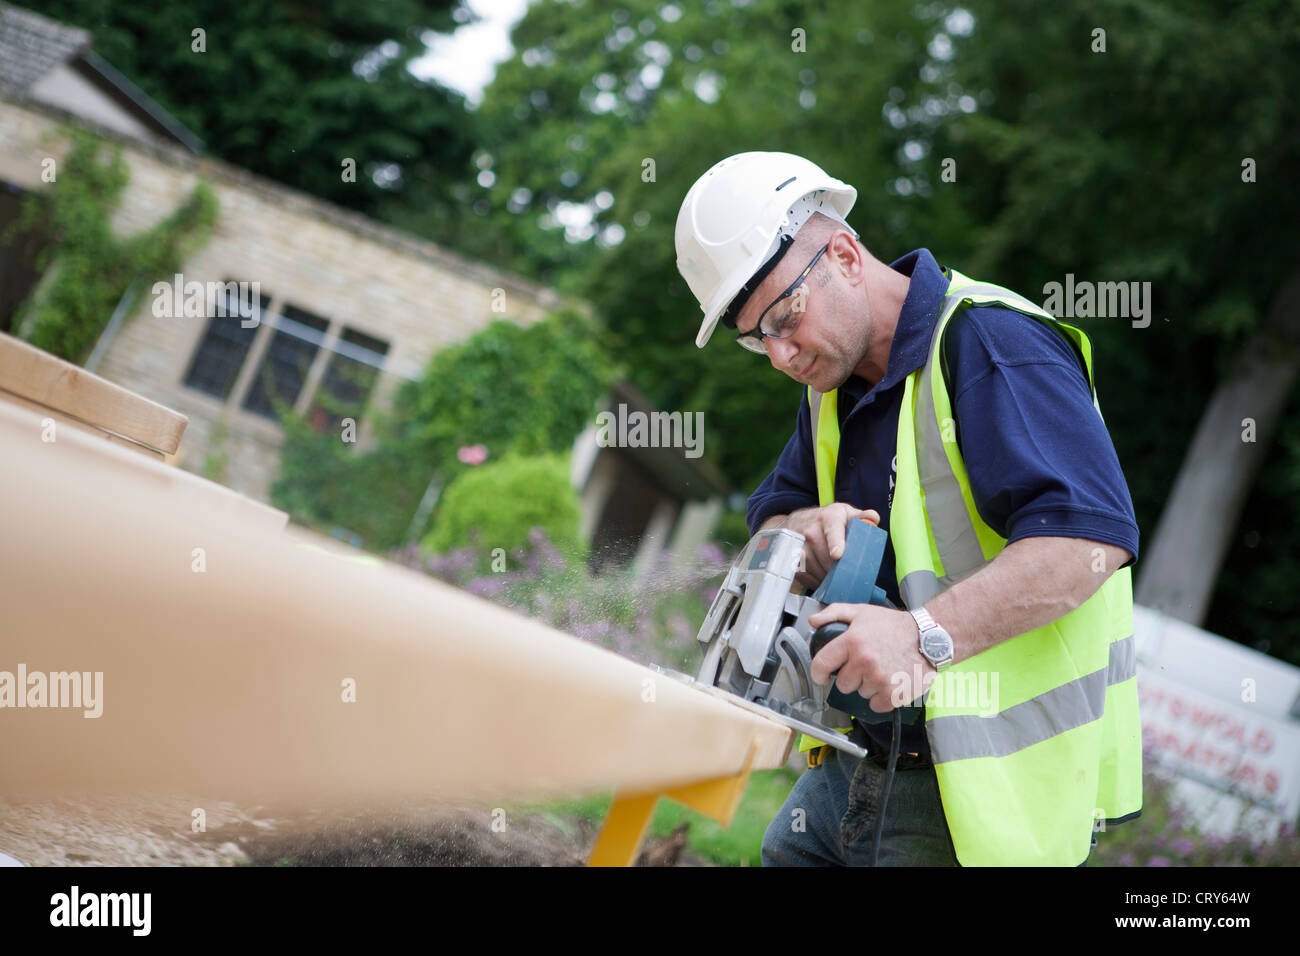 Builder using a circular saw to cut rafters to size on a building site. Stock Photo